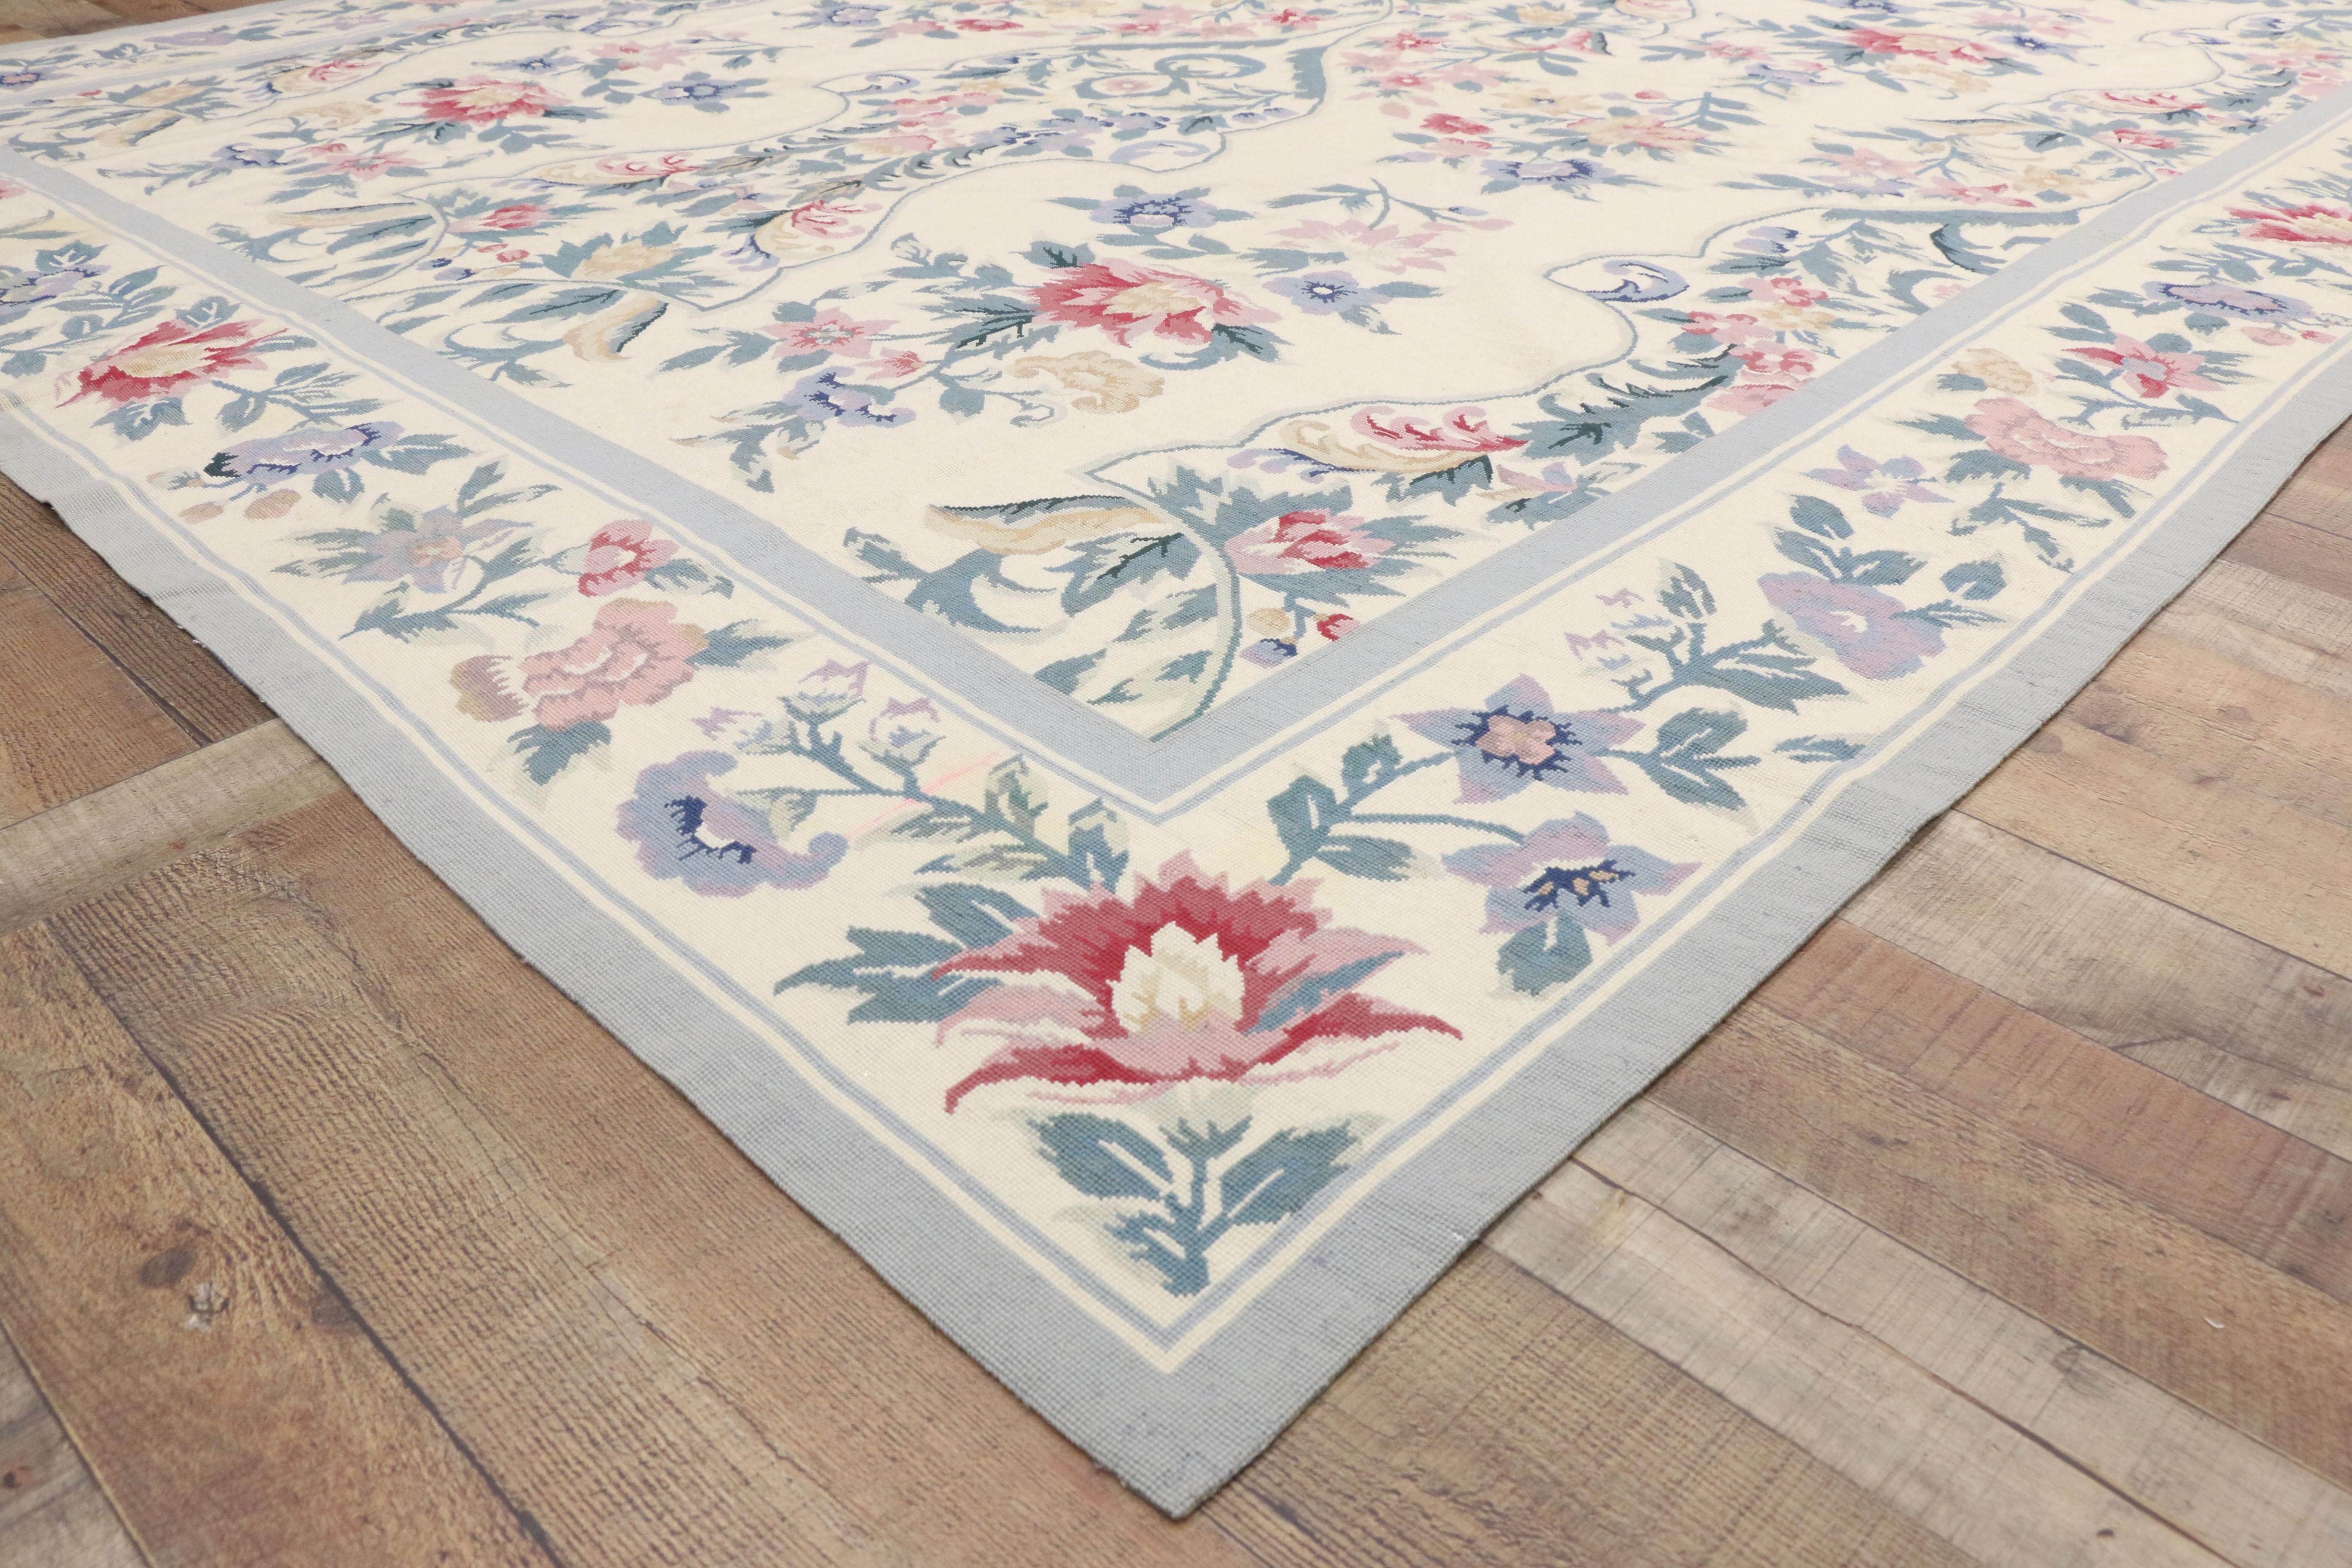 77204 Vintage French Aubusson Style Needlepoint Chinese Rug with Chintz Style. Drawing inspiration from Mario Buatta and Chintz style, this needlepoint Aubusson style rug beautifully showcases a timeless floral design. An all-over pattern of